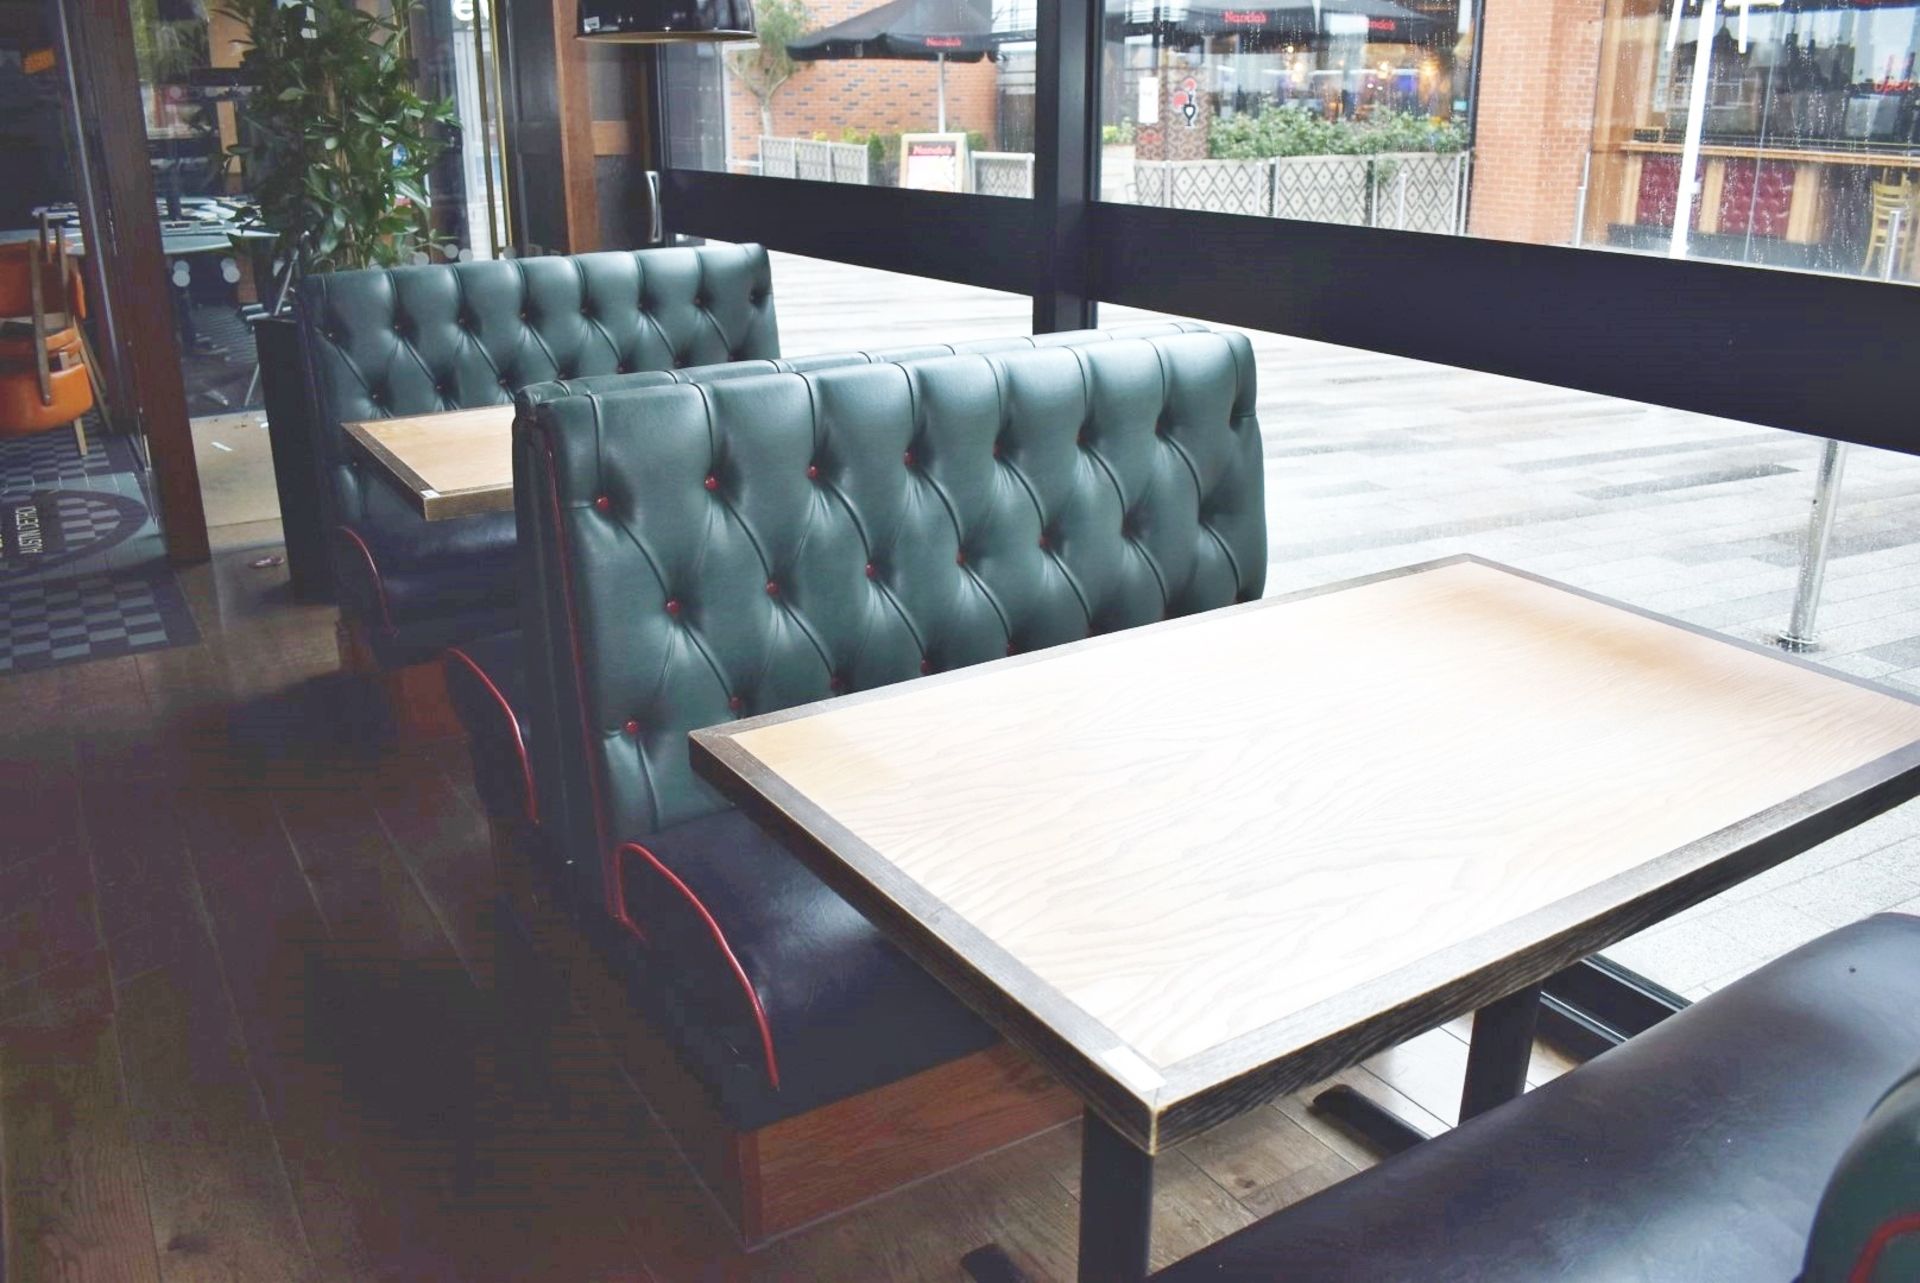 4 x Sections of Restaurant Double Booth Seating - Sits Up to 12 Persons - Green & Black Upholstery - Image 18 of 24